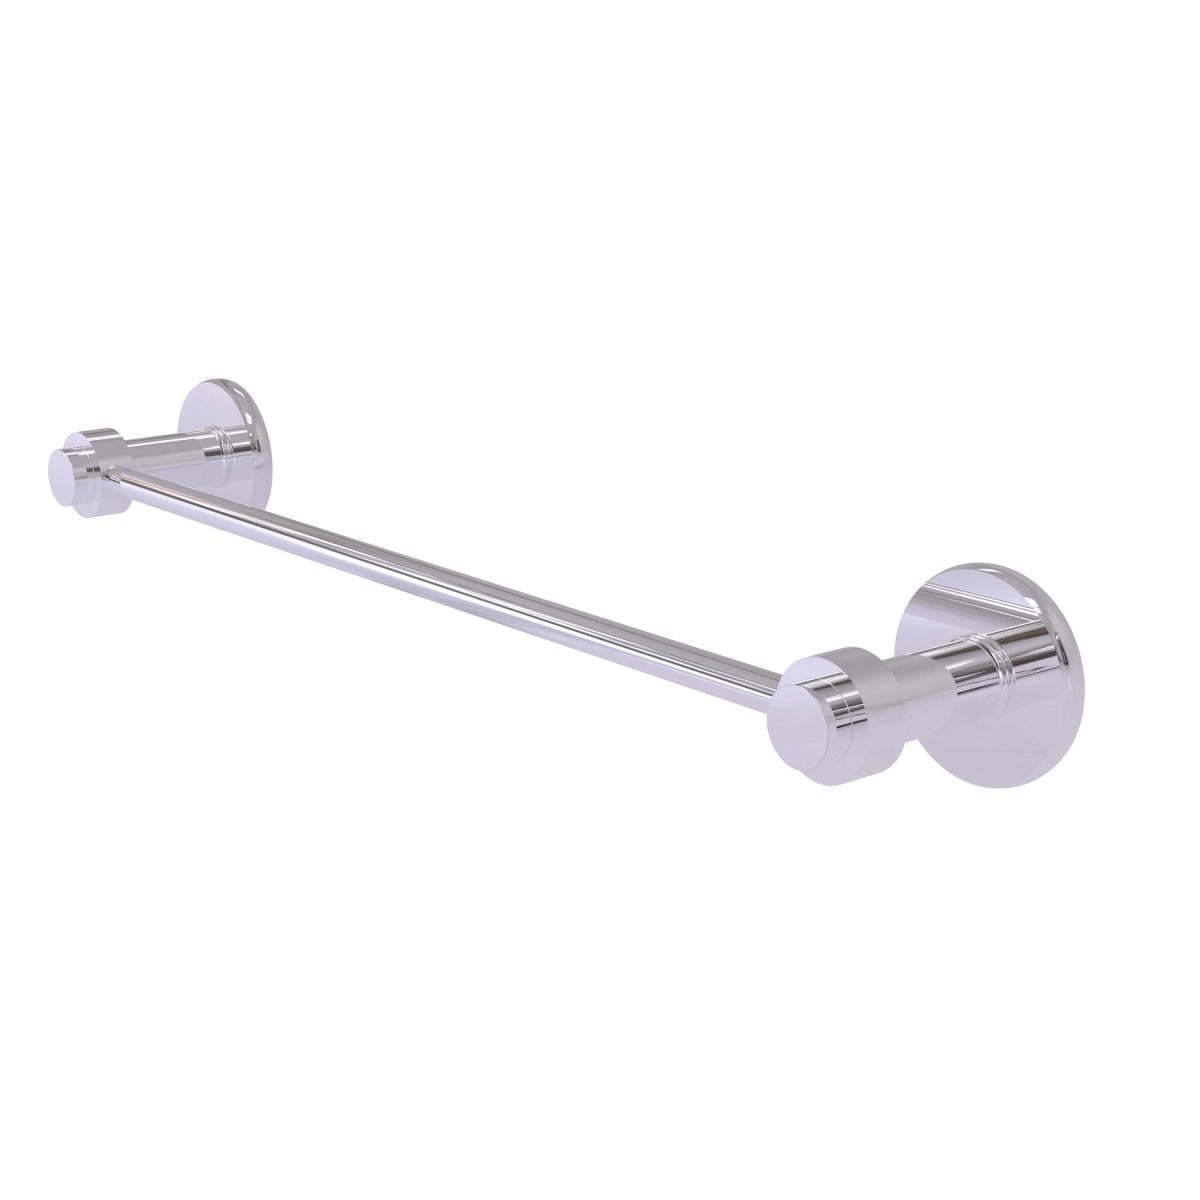 Allied Brass 931-36-PC 36 in. Mercury Collection Towel Bar, Polished Chrome